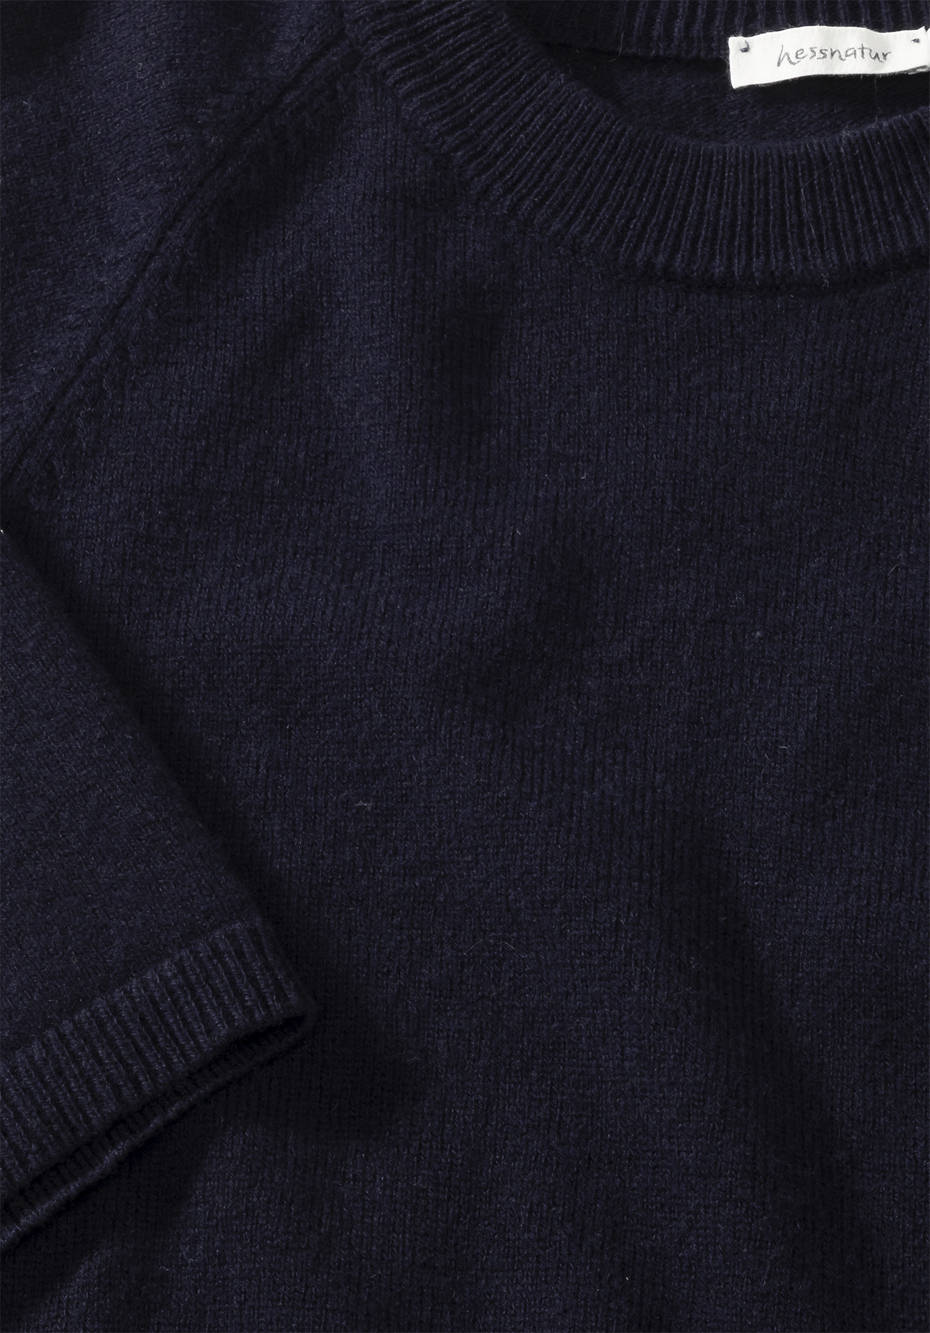 Half-sleeved sweater made from pure organic lambswool